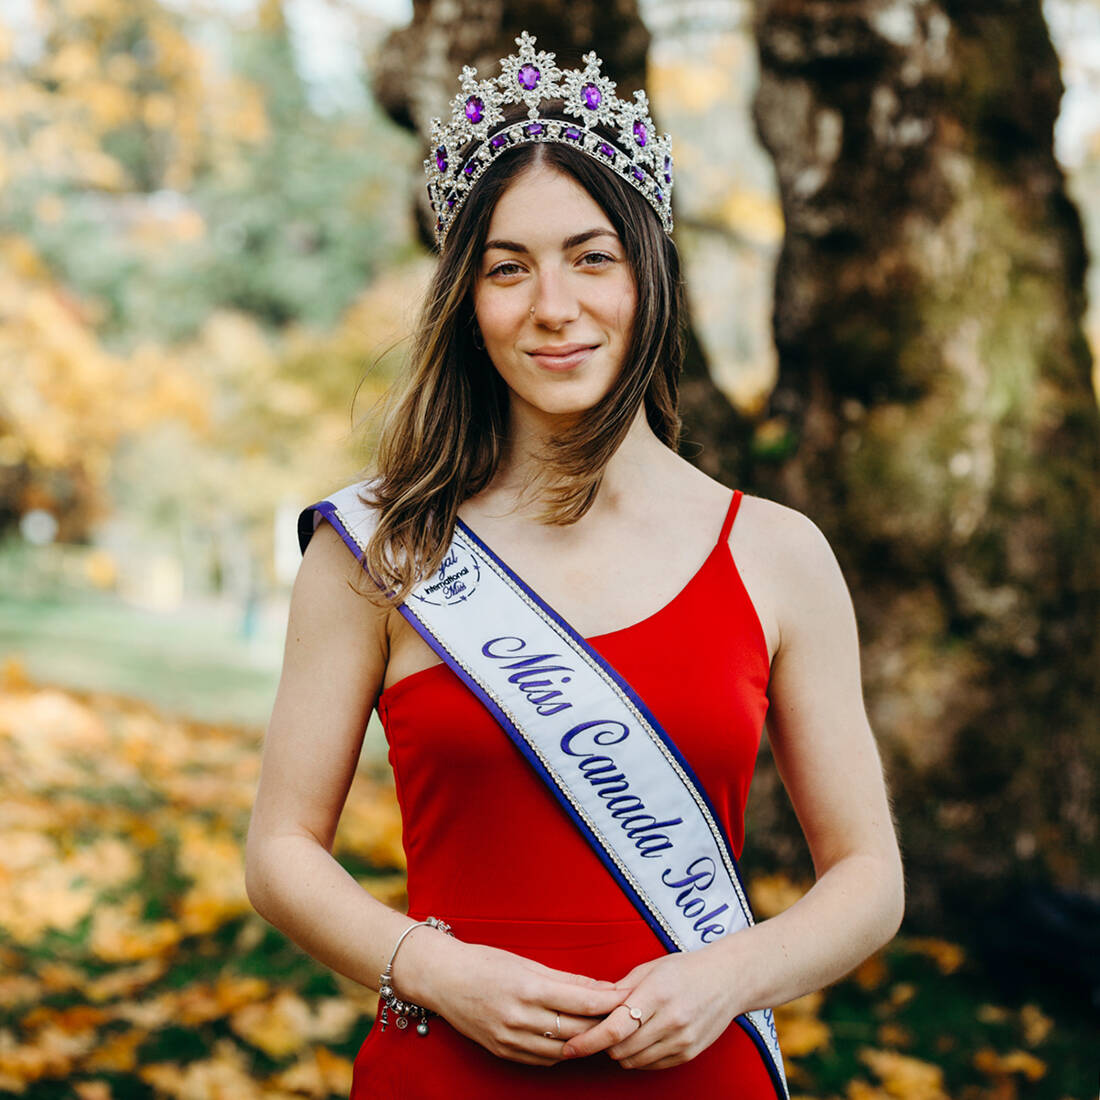 Nanaimo’s Demitria Rounis is Royal International Miss Canada Role Model for Western Canada. (Jesse Miller Photography photo)